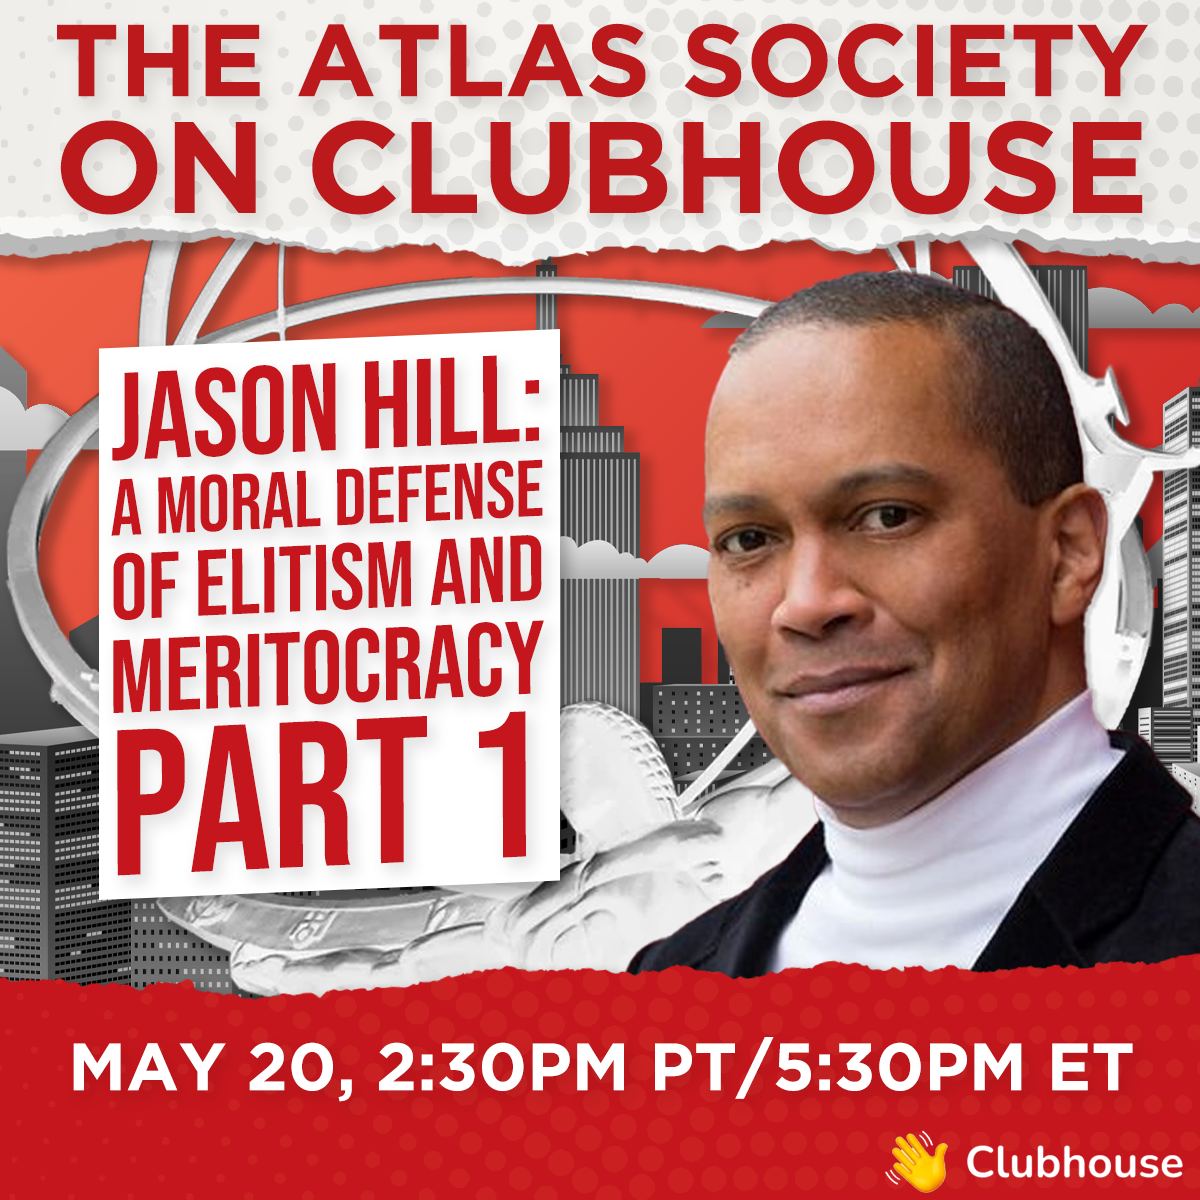 Jason Hill -  A Moral Defense of Elitism and Meritocracy Part 1